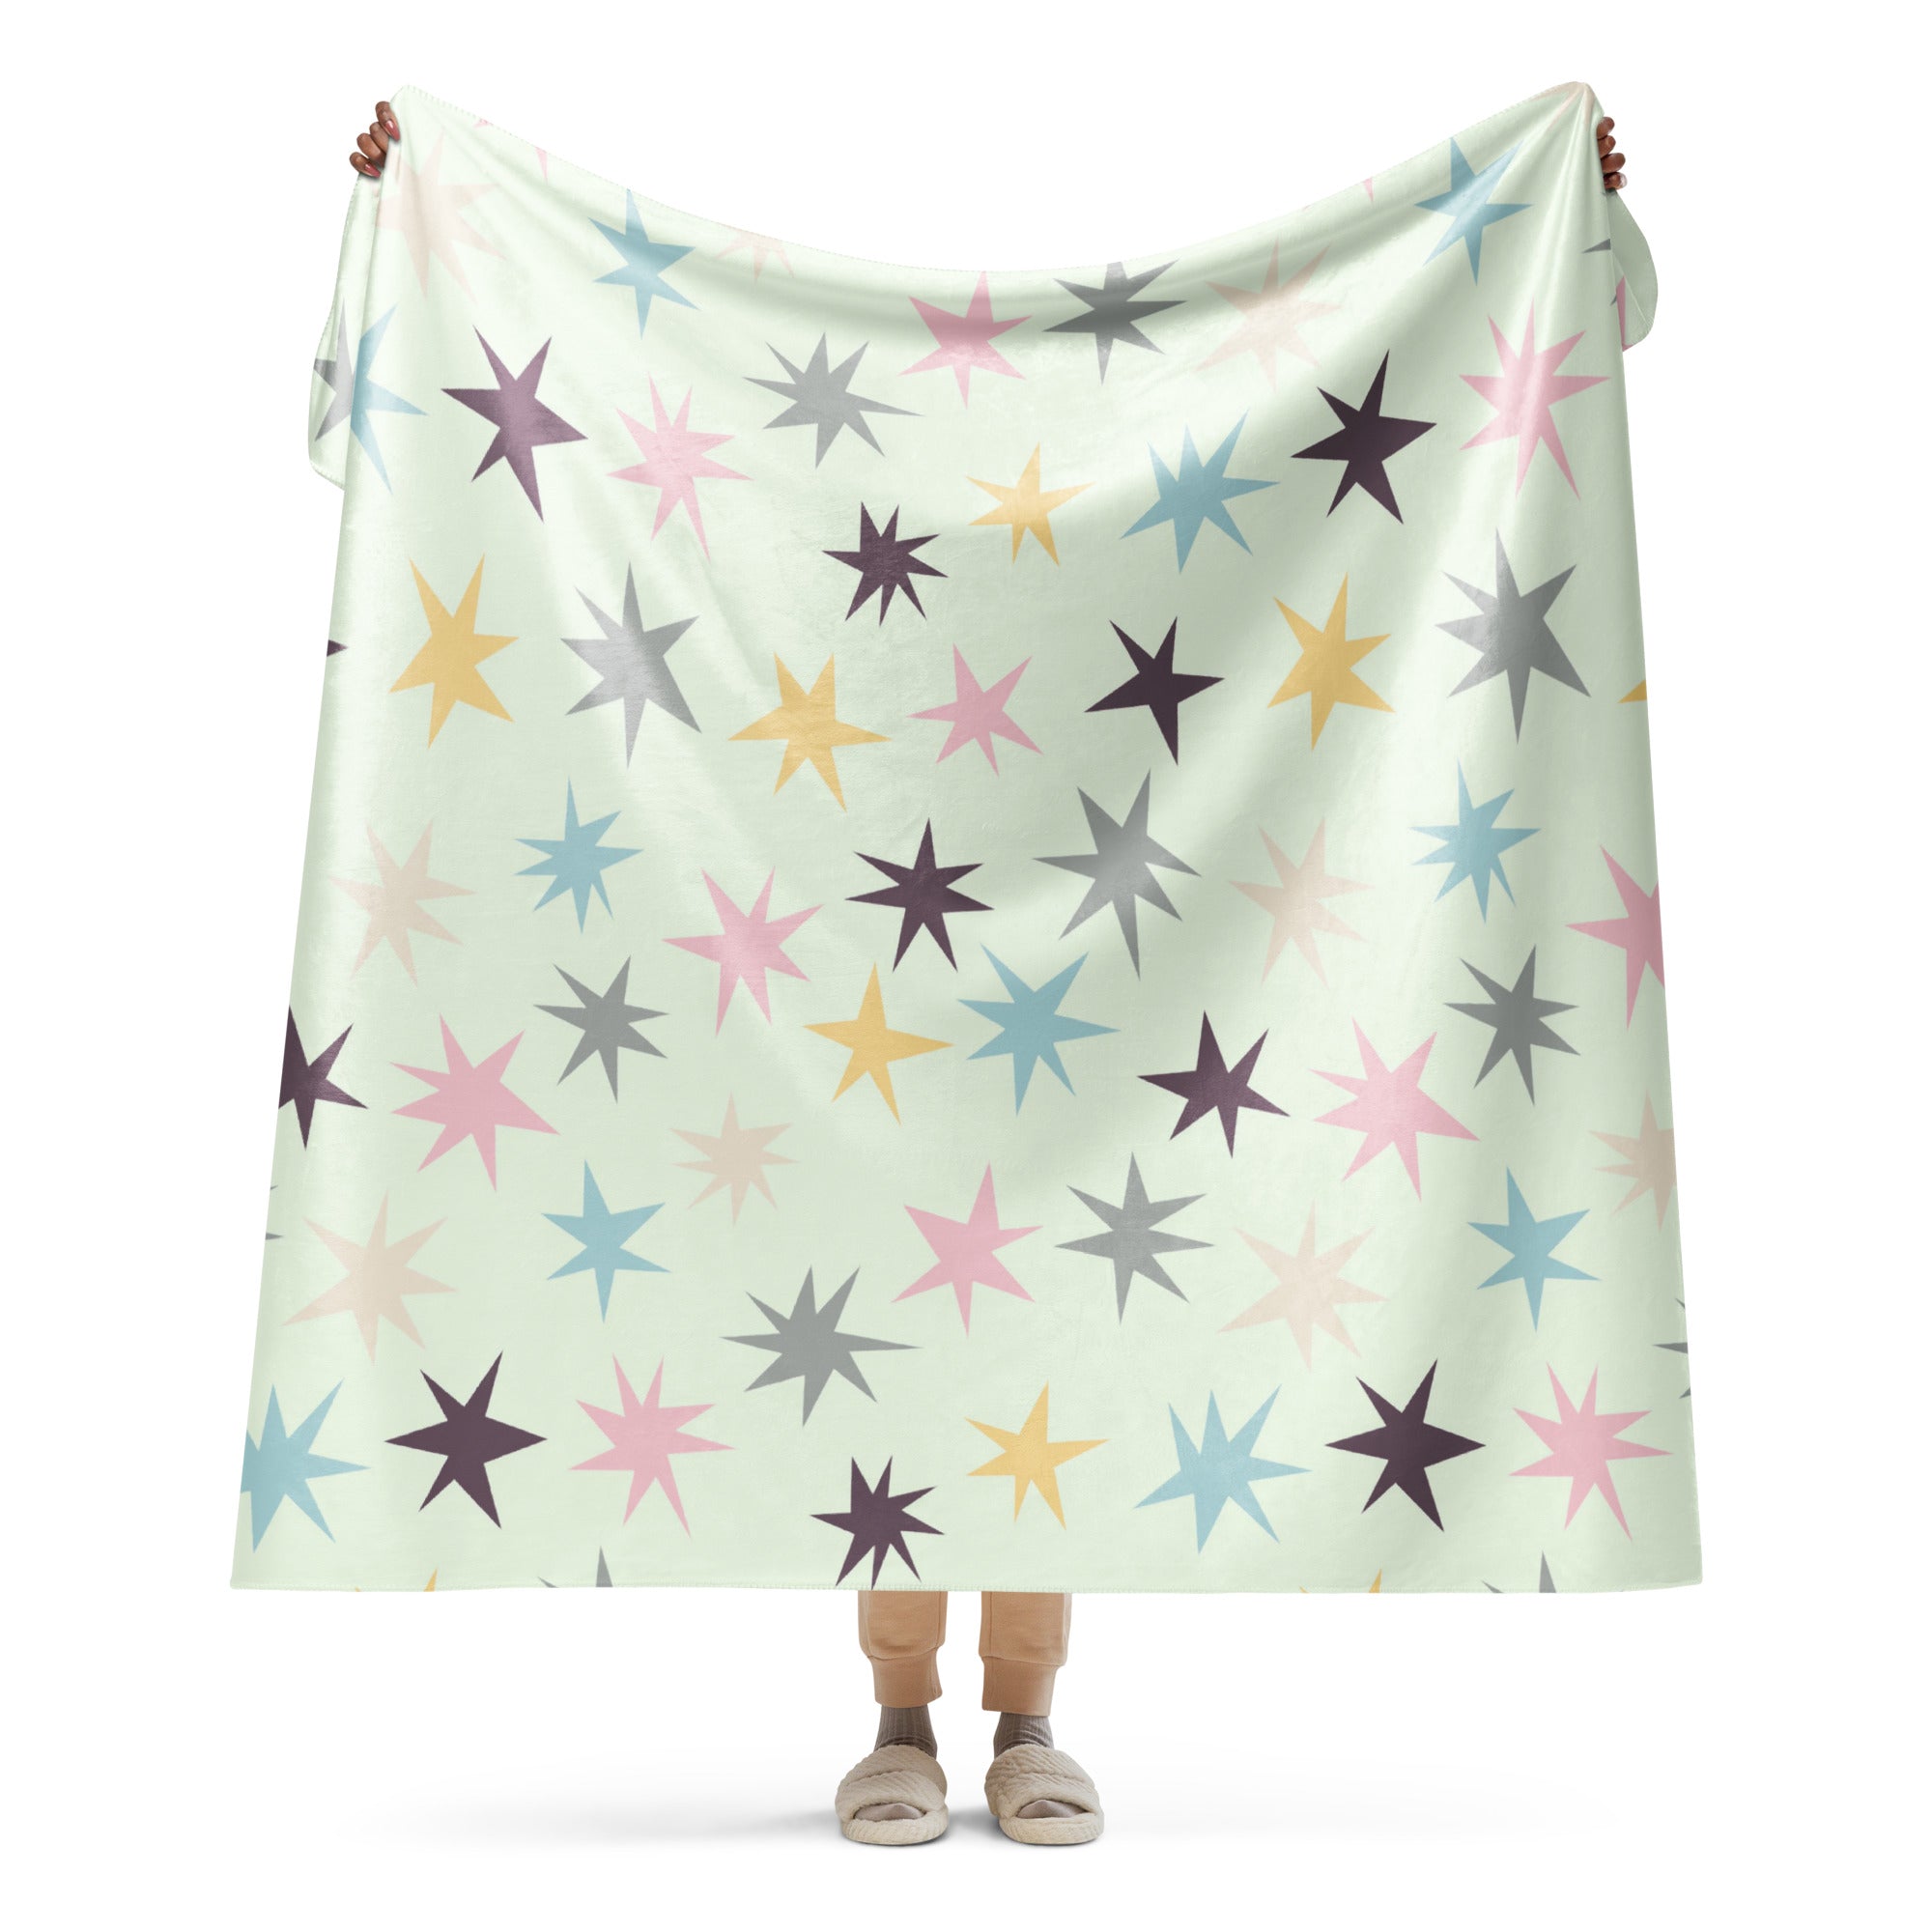 Colorful Stars Sherpa blanket lioness-love